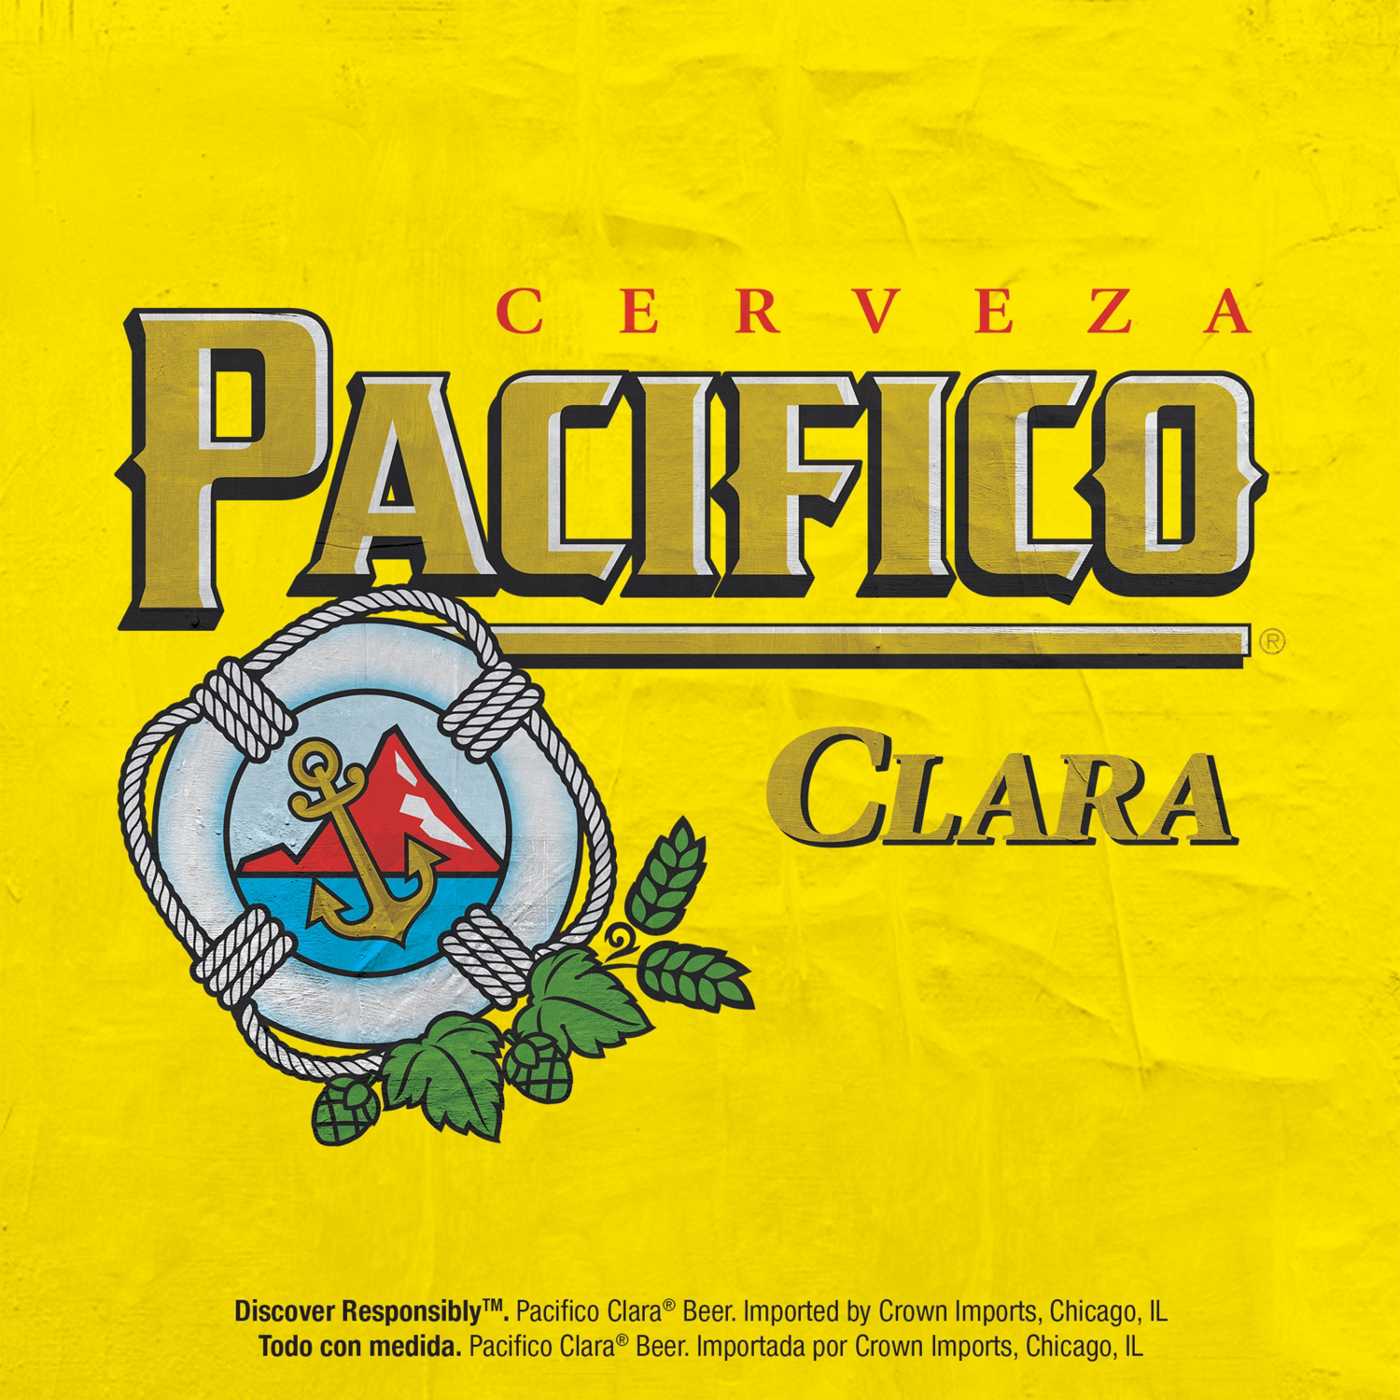 Pacifico Clara Mexican Lager Import Beer 12 oz Bottles, 12 pk; image 9 of 10